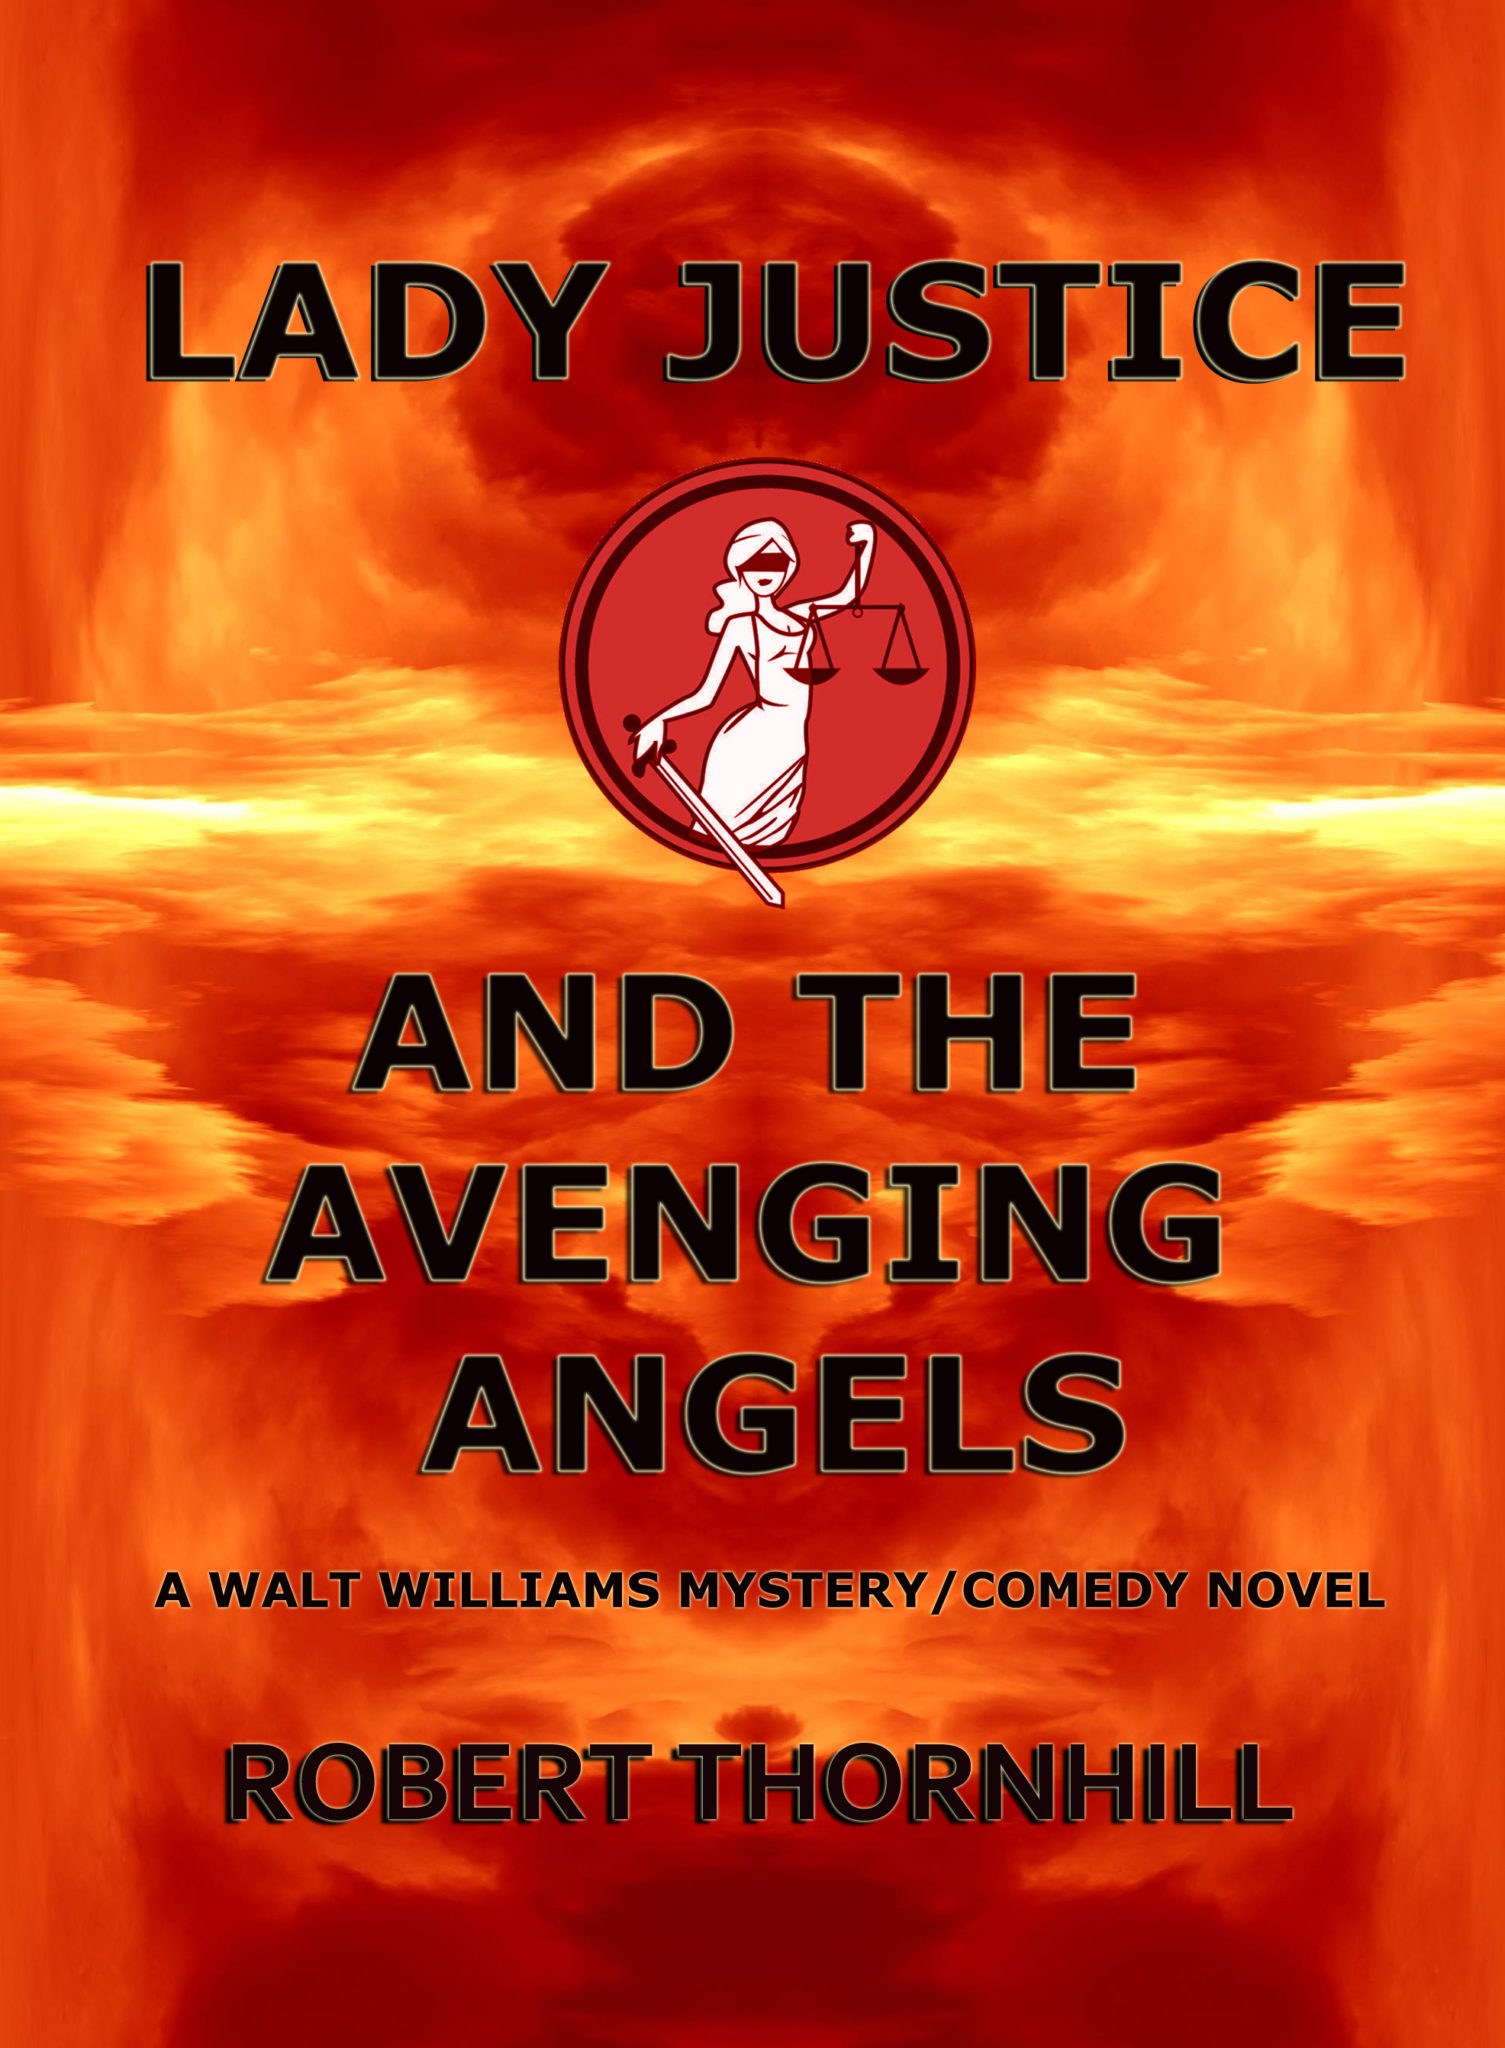 FREE: Lady Justice and the Avenging Angels by Robert Thornhill